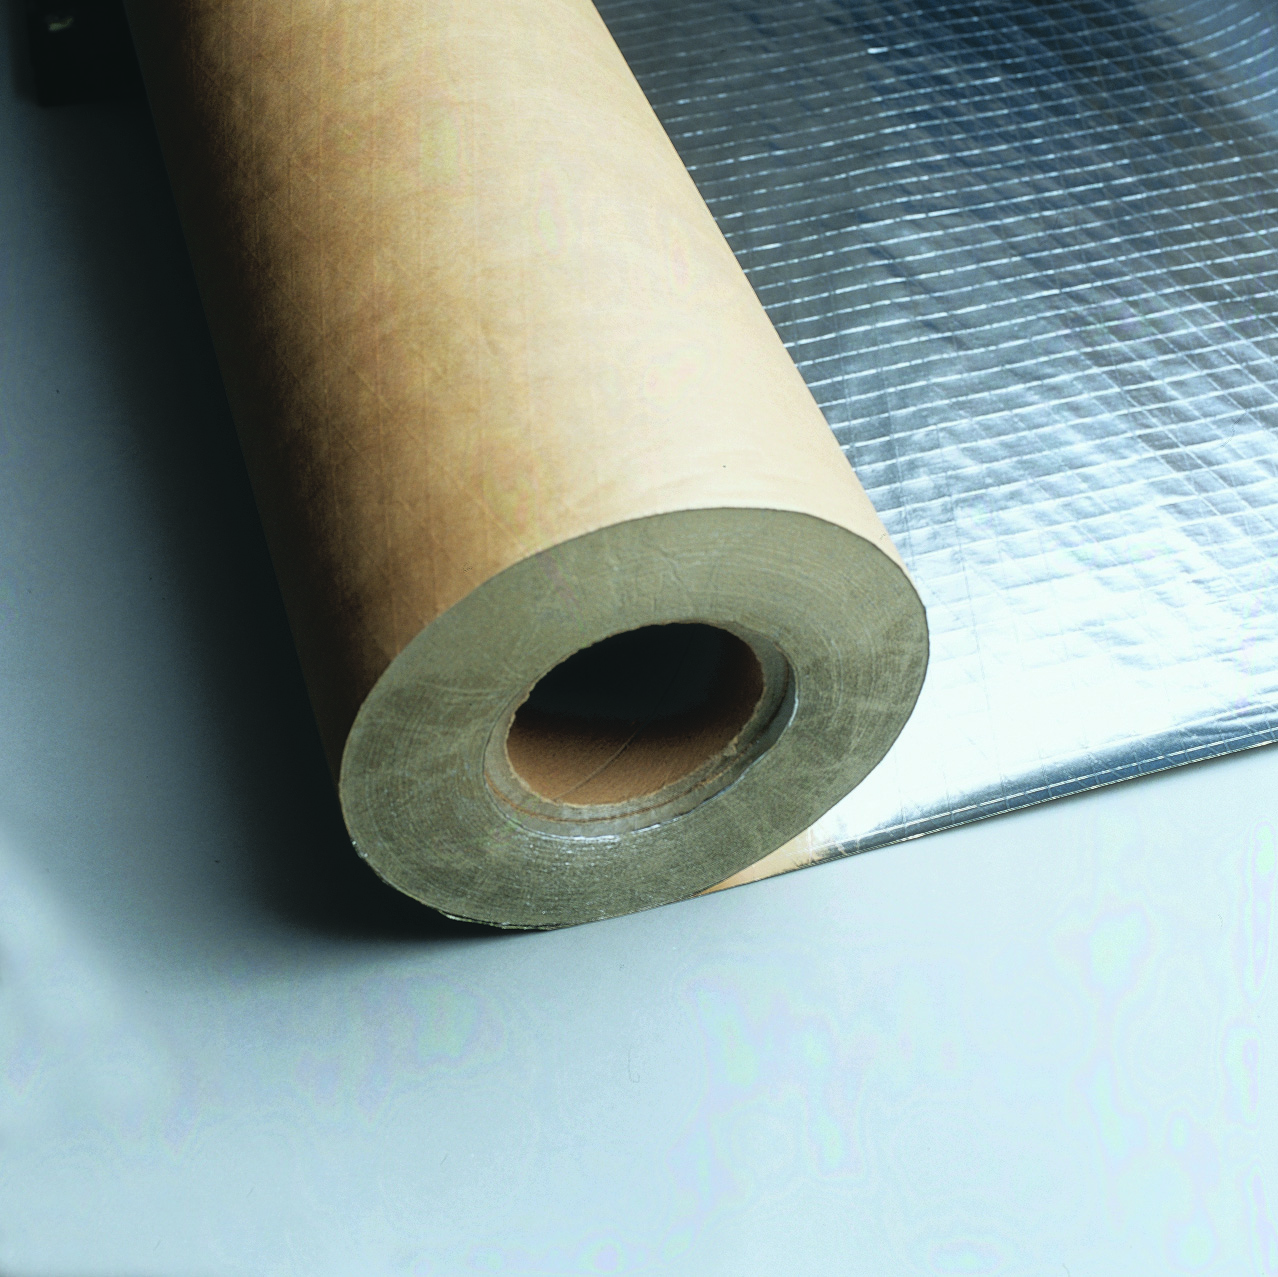 Adhesive Backed Absorbent Roll - Sticky Floor Mat - 34 by 50